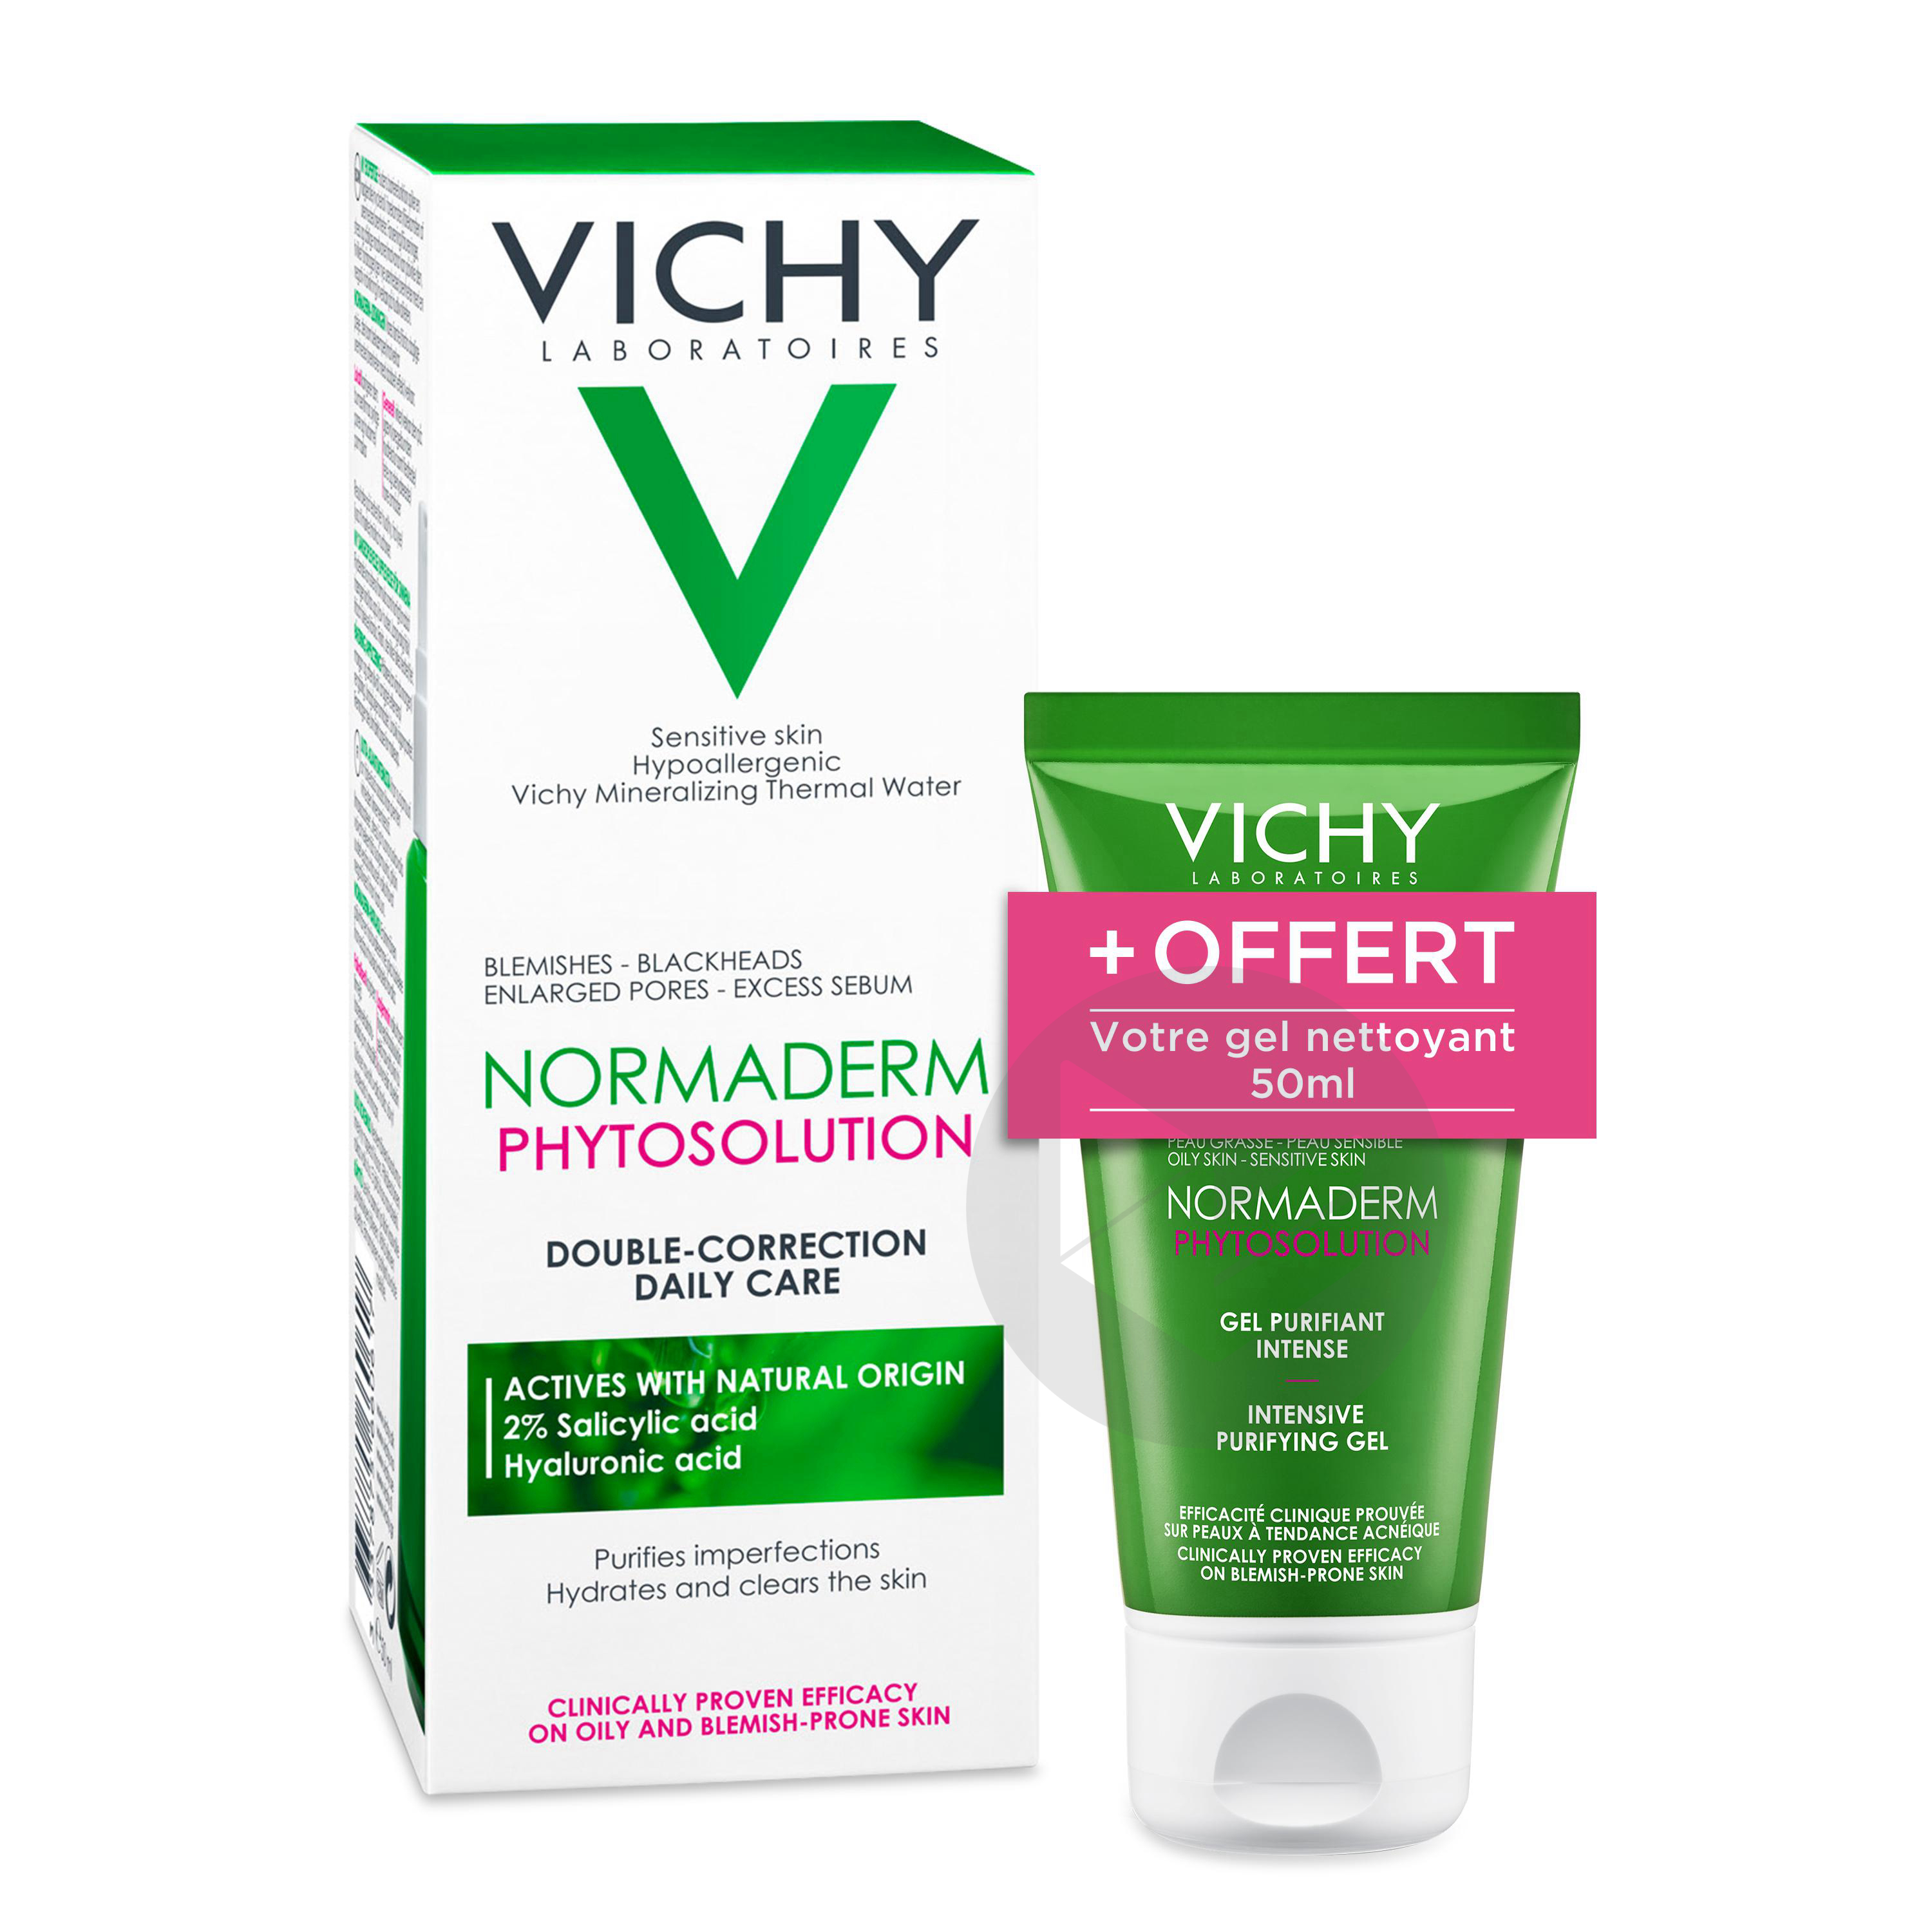 Normaderm gel purifiant intense. Vichy Normaderm phytosolution 50 мл. Vichy Normaderm 50 ml гель. Vichy Normaderm Gel purifiant intense. Vichy Normaderm phytosolution Gel purifiant.